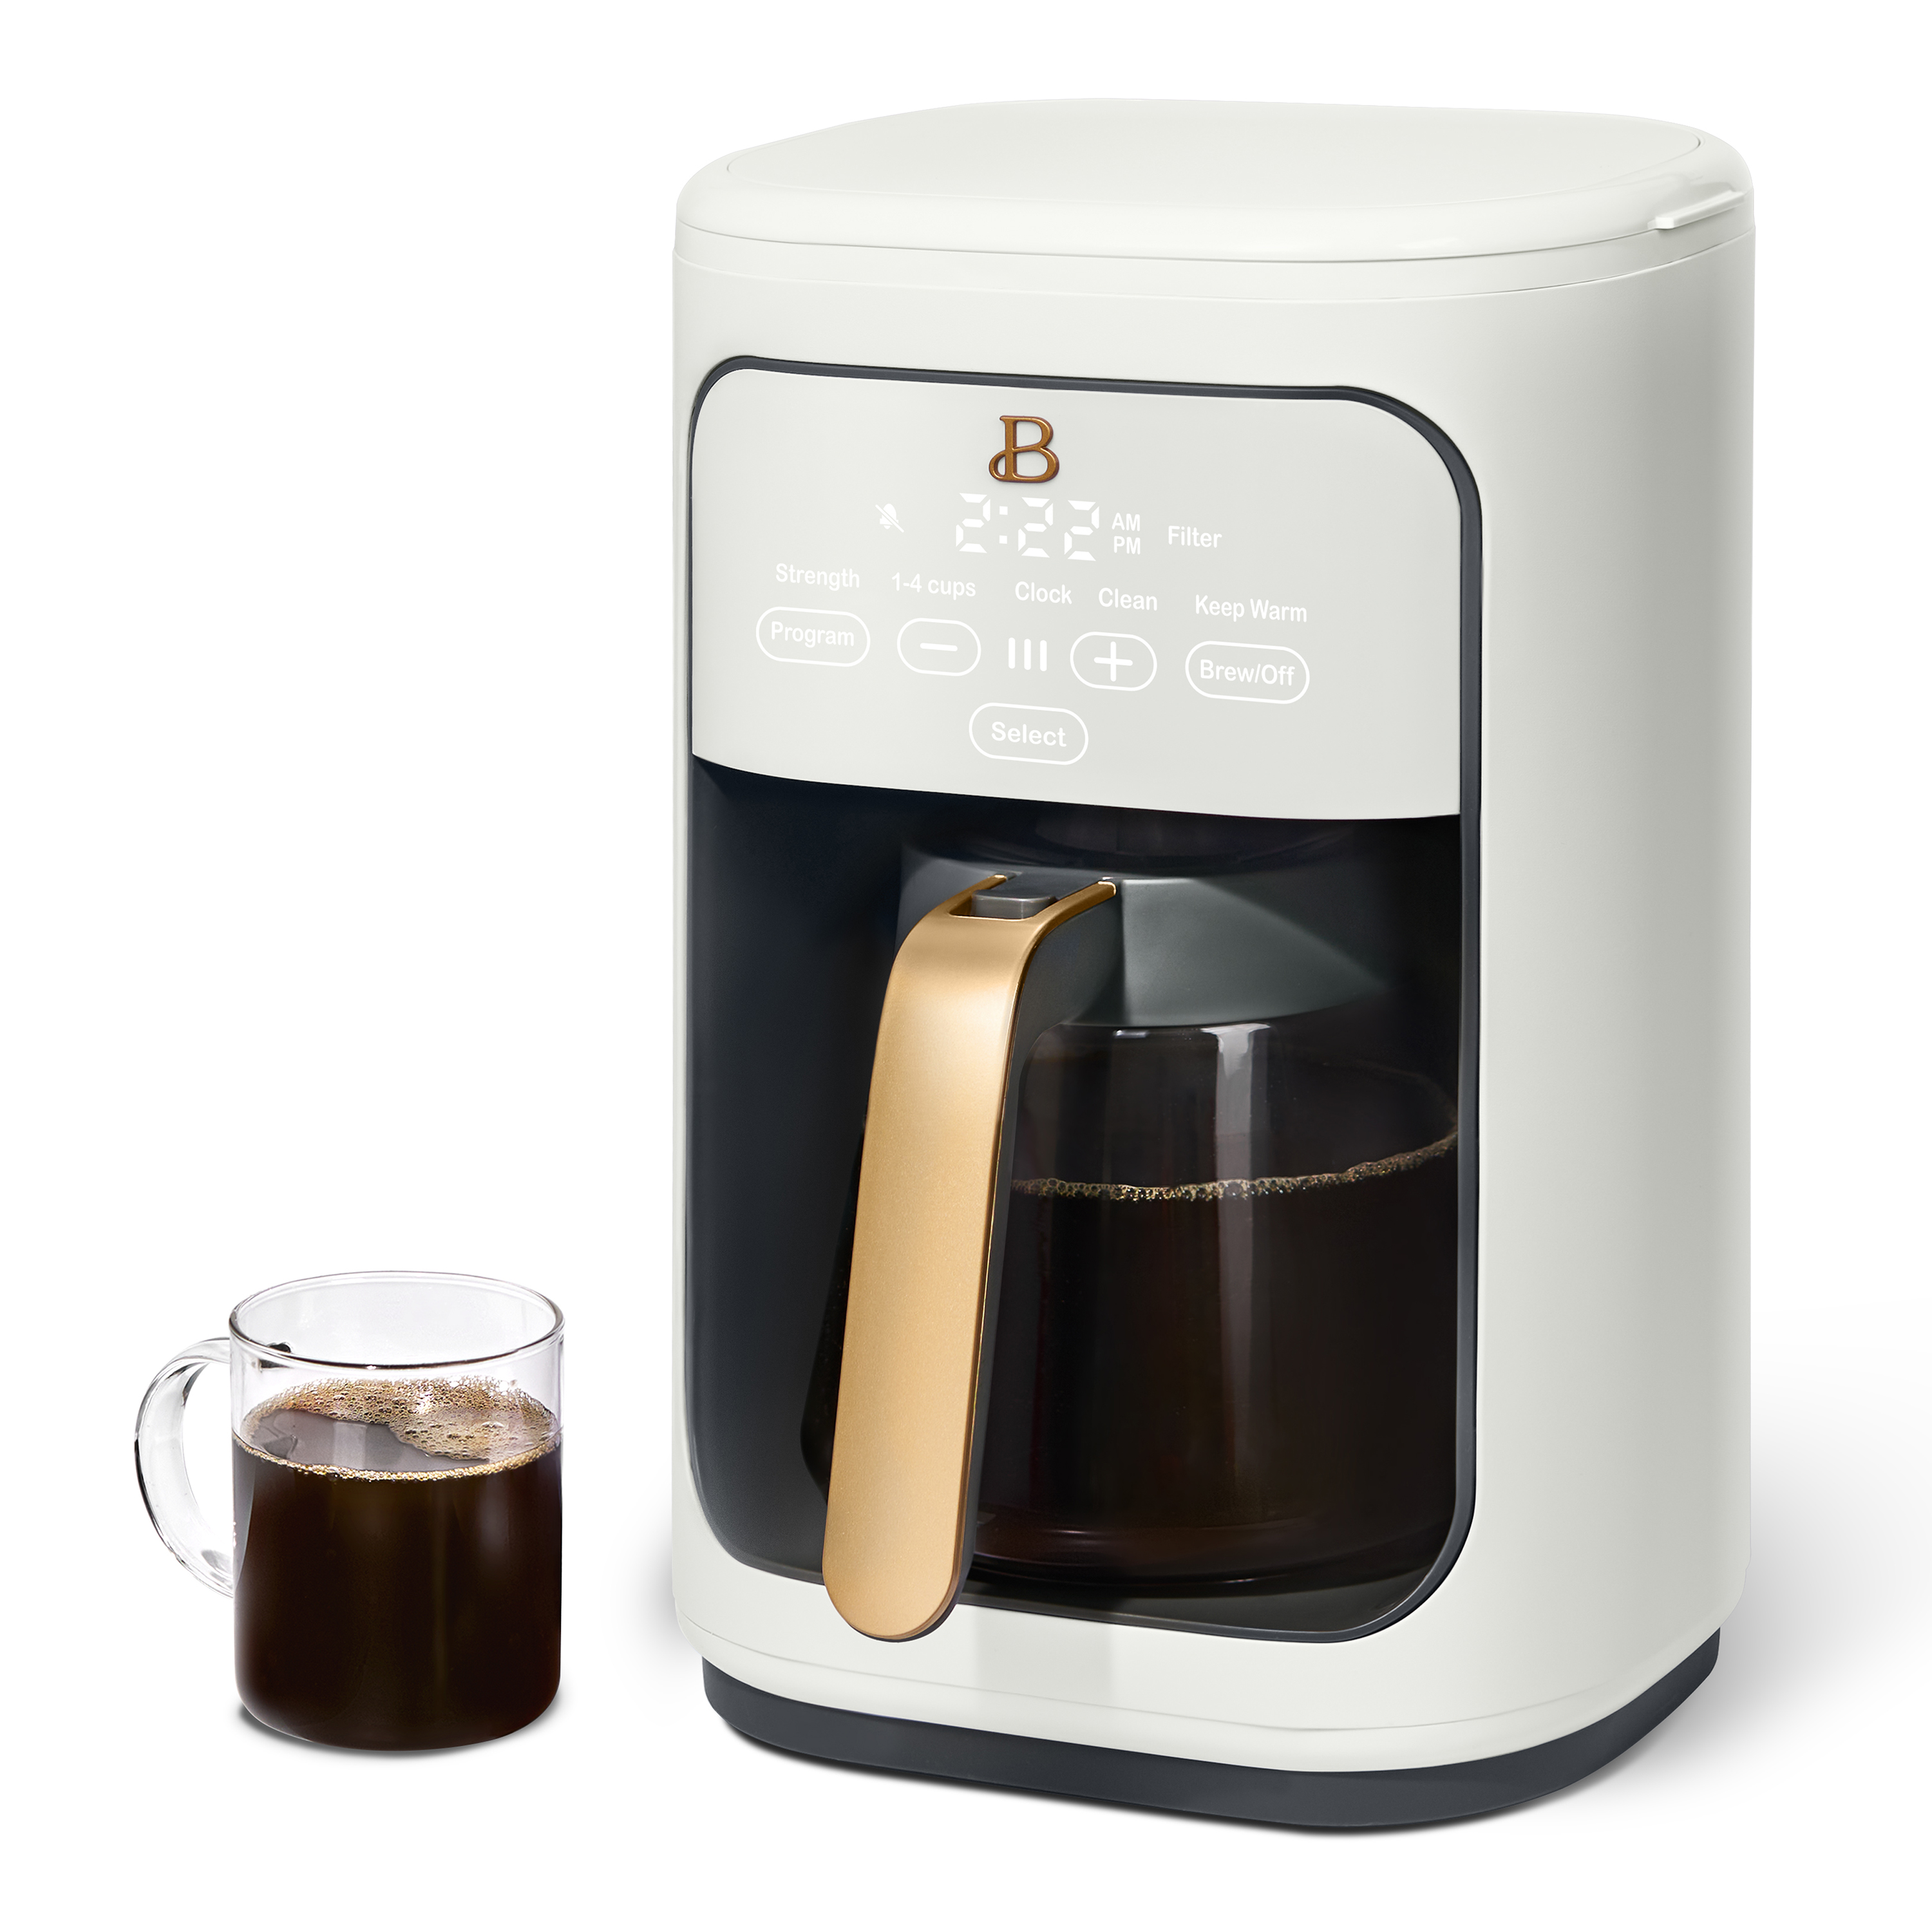 Beautiful 14-Cup Programmable Drip Coffee Maker with Touch-Activated Display, White Icing by Drew Barrymore - image 5 of 6